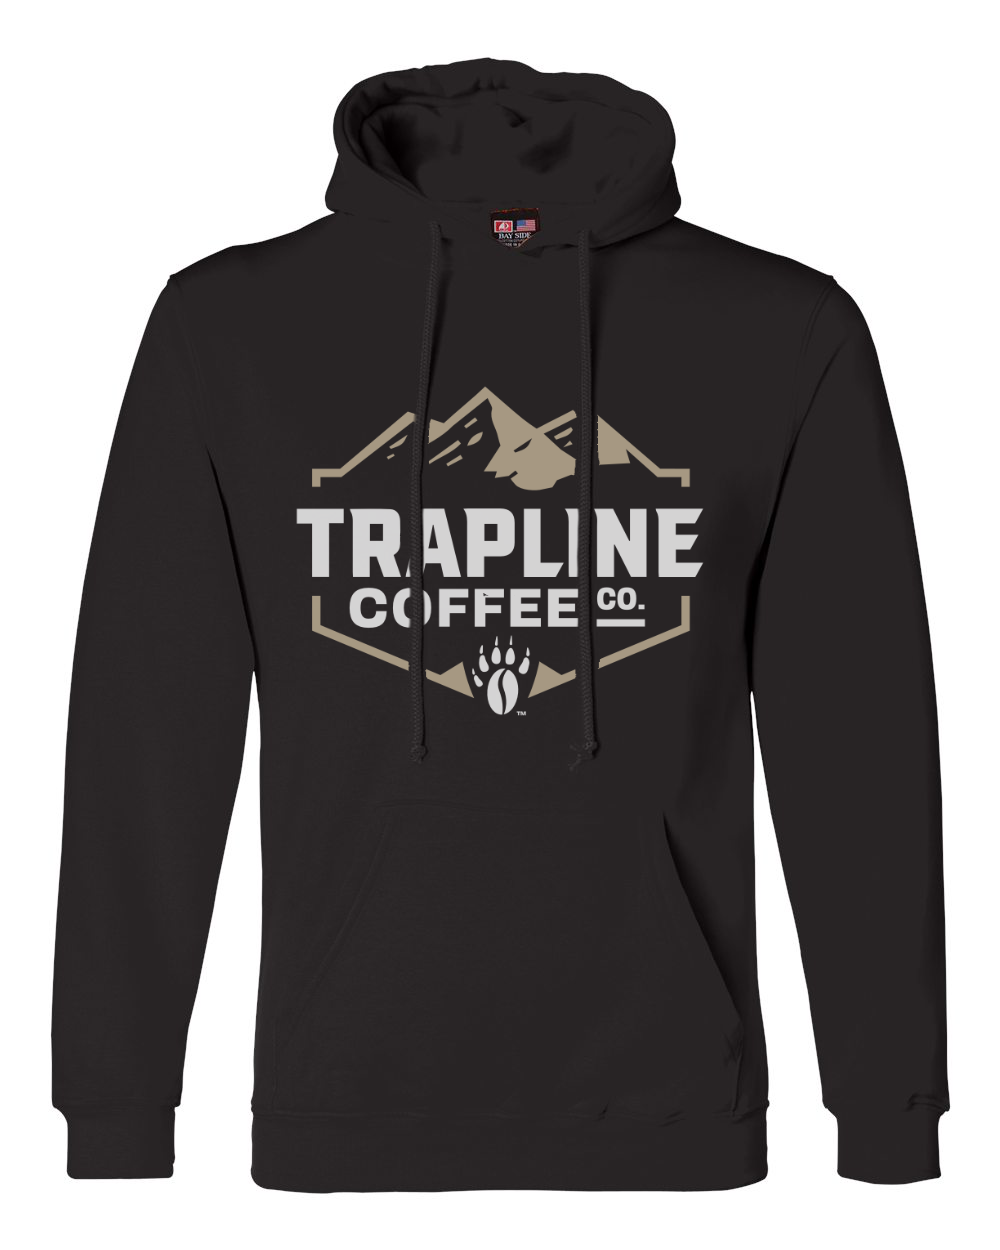 Trapline Coffee Co. Hoodie - Large Chest Logo